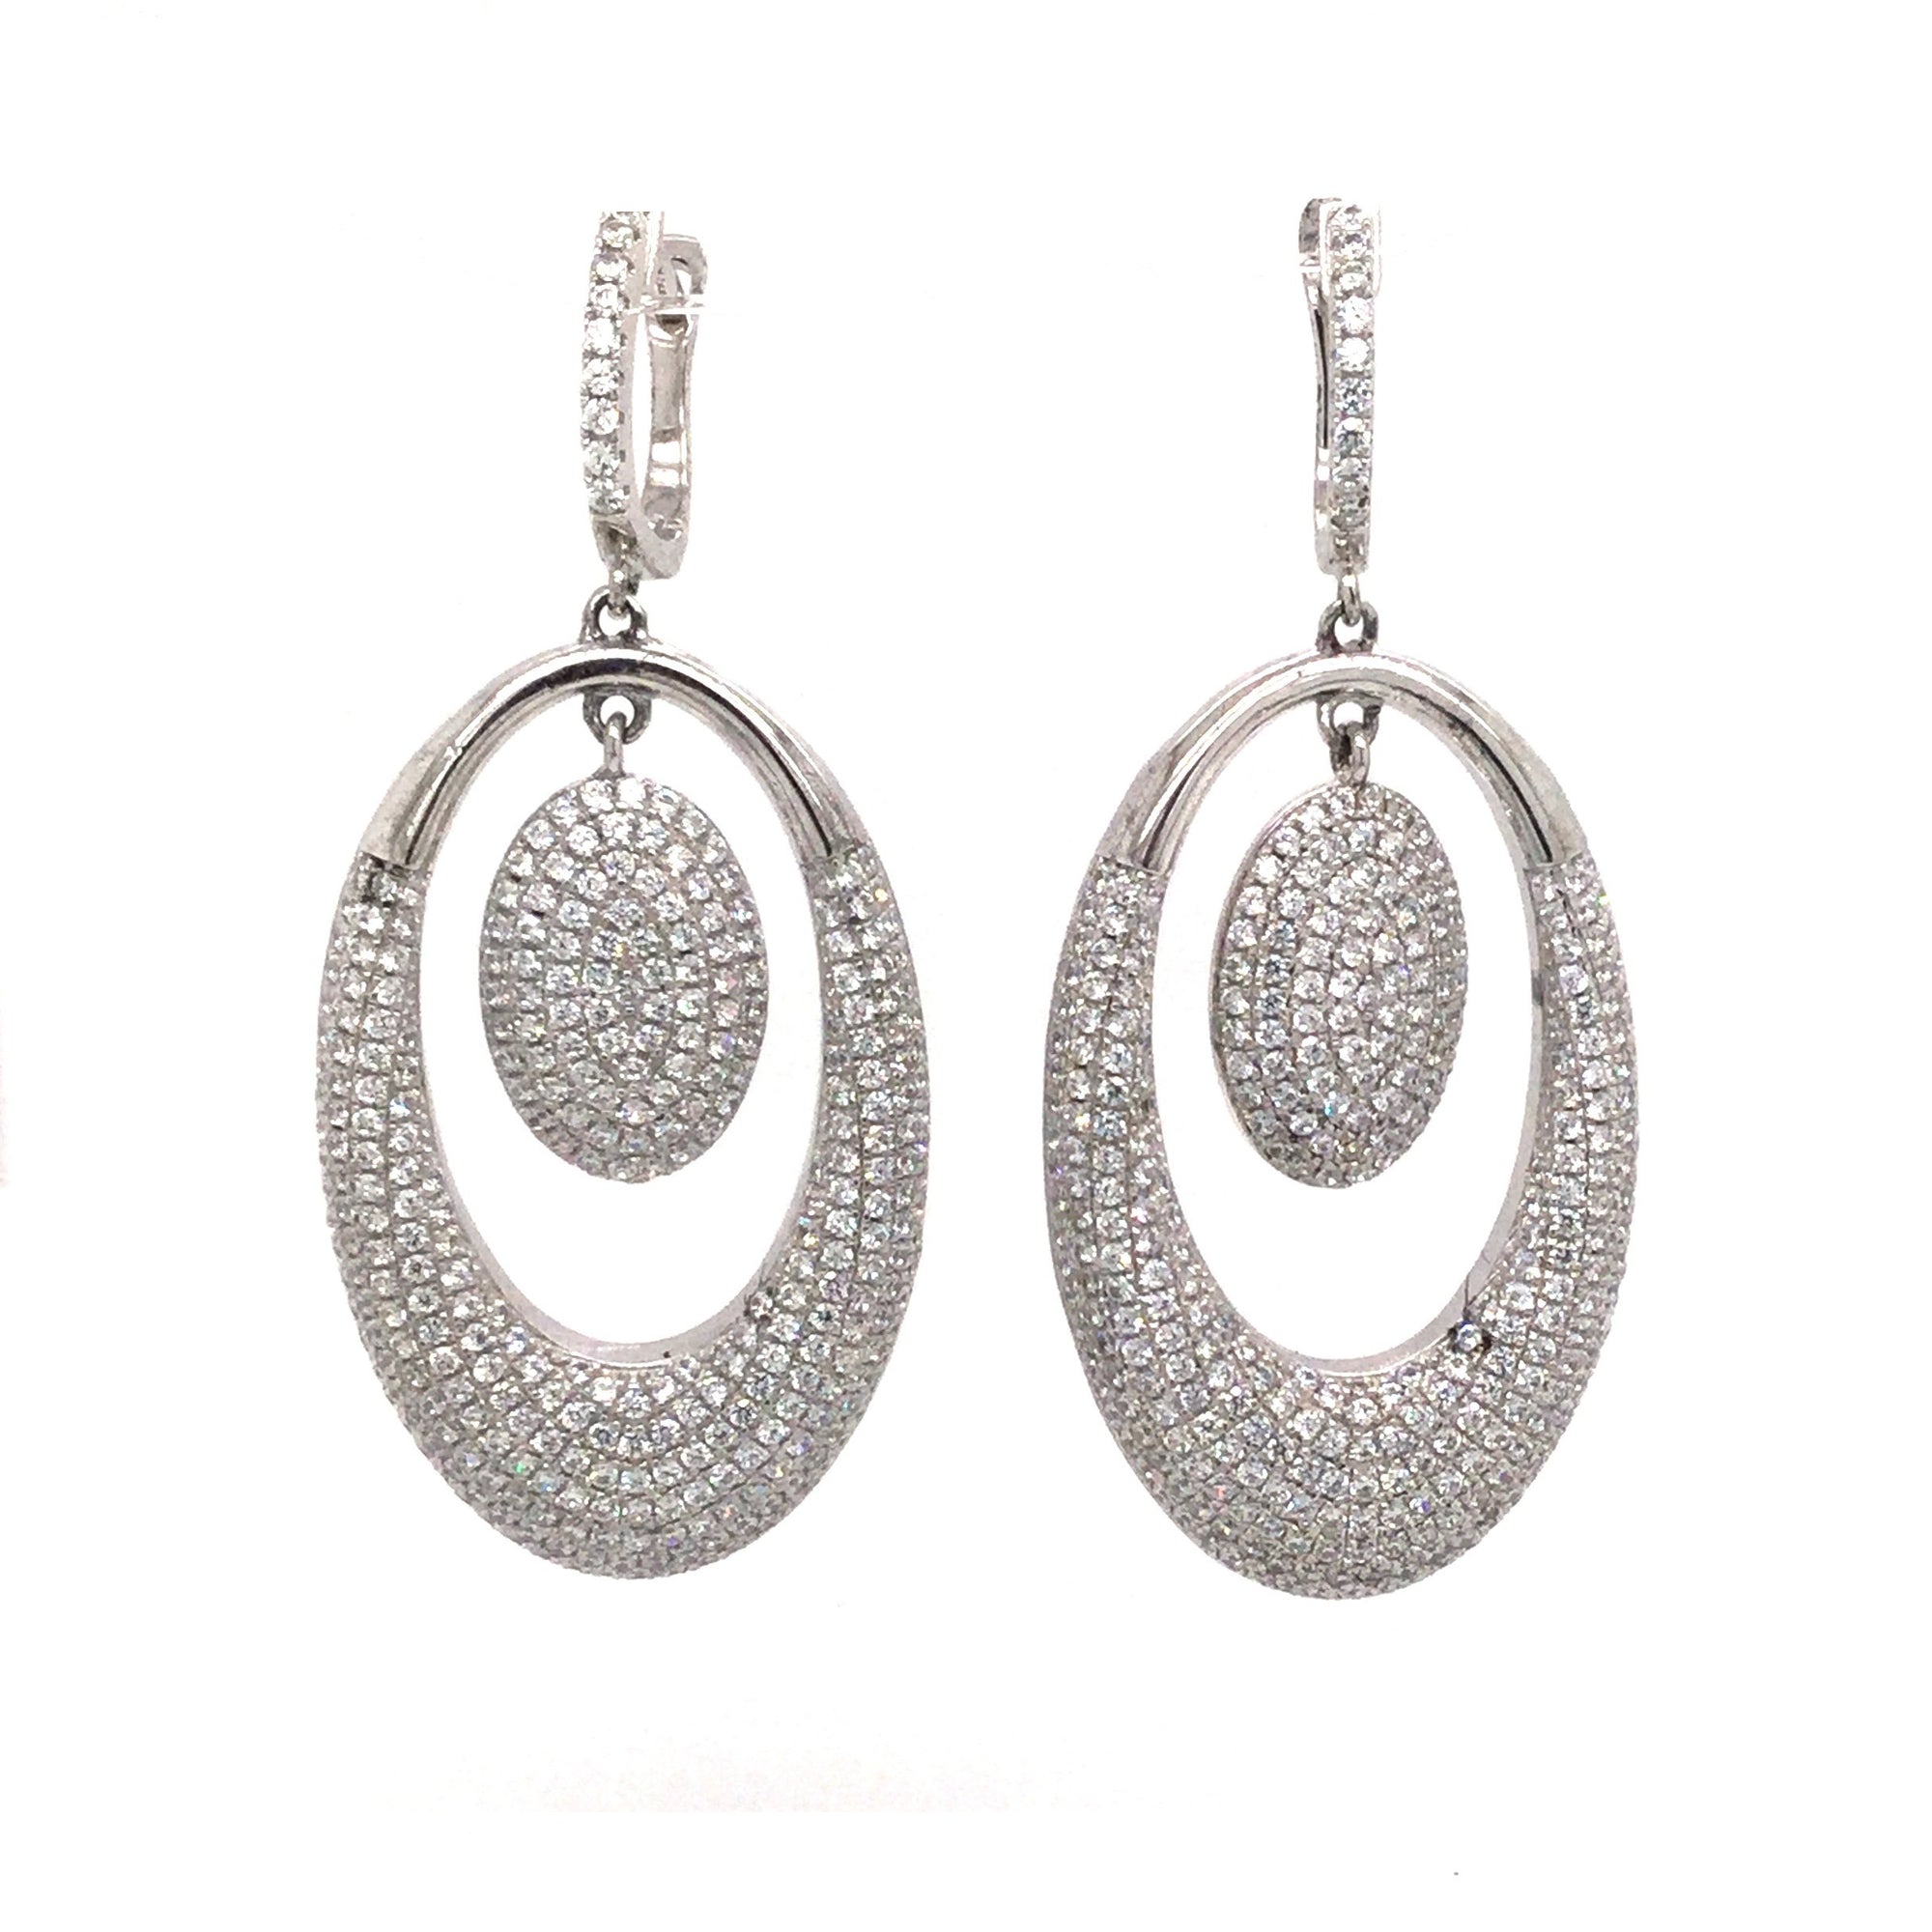 Sterling Silver Rhodium Plated Chandelier Earrings With Swarovski Crystals